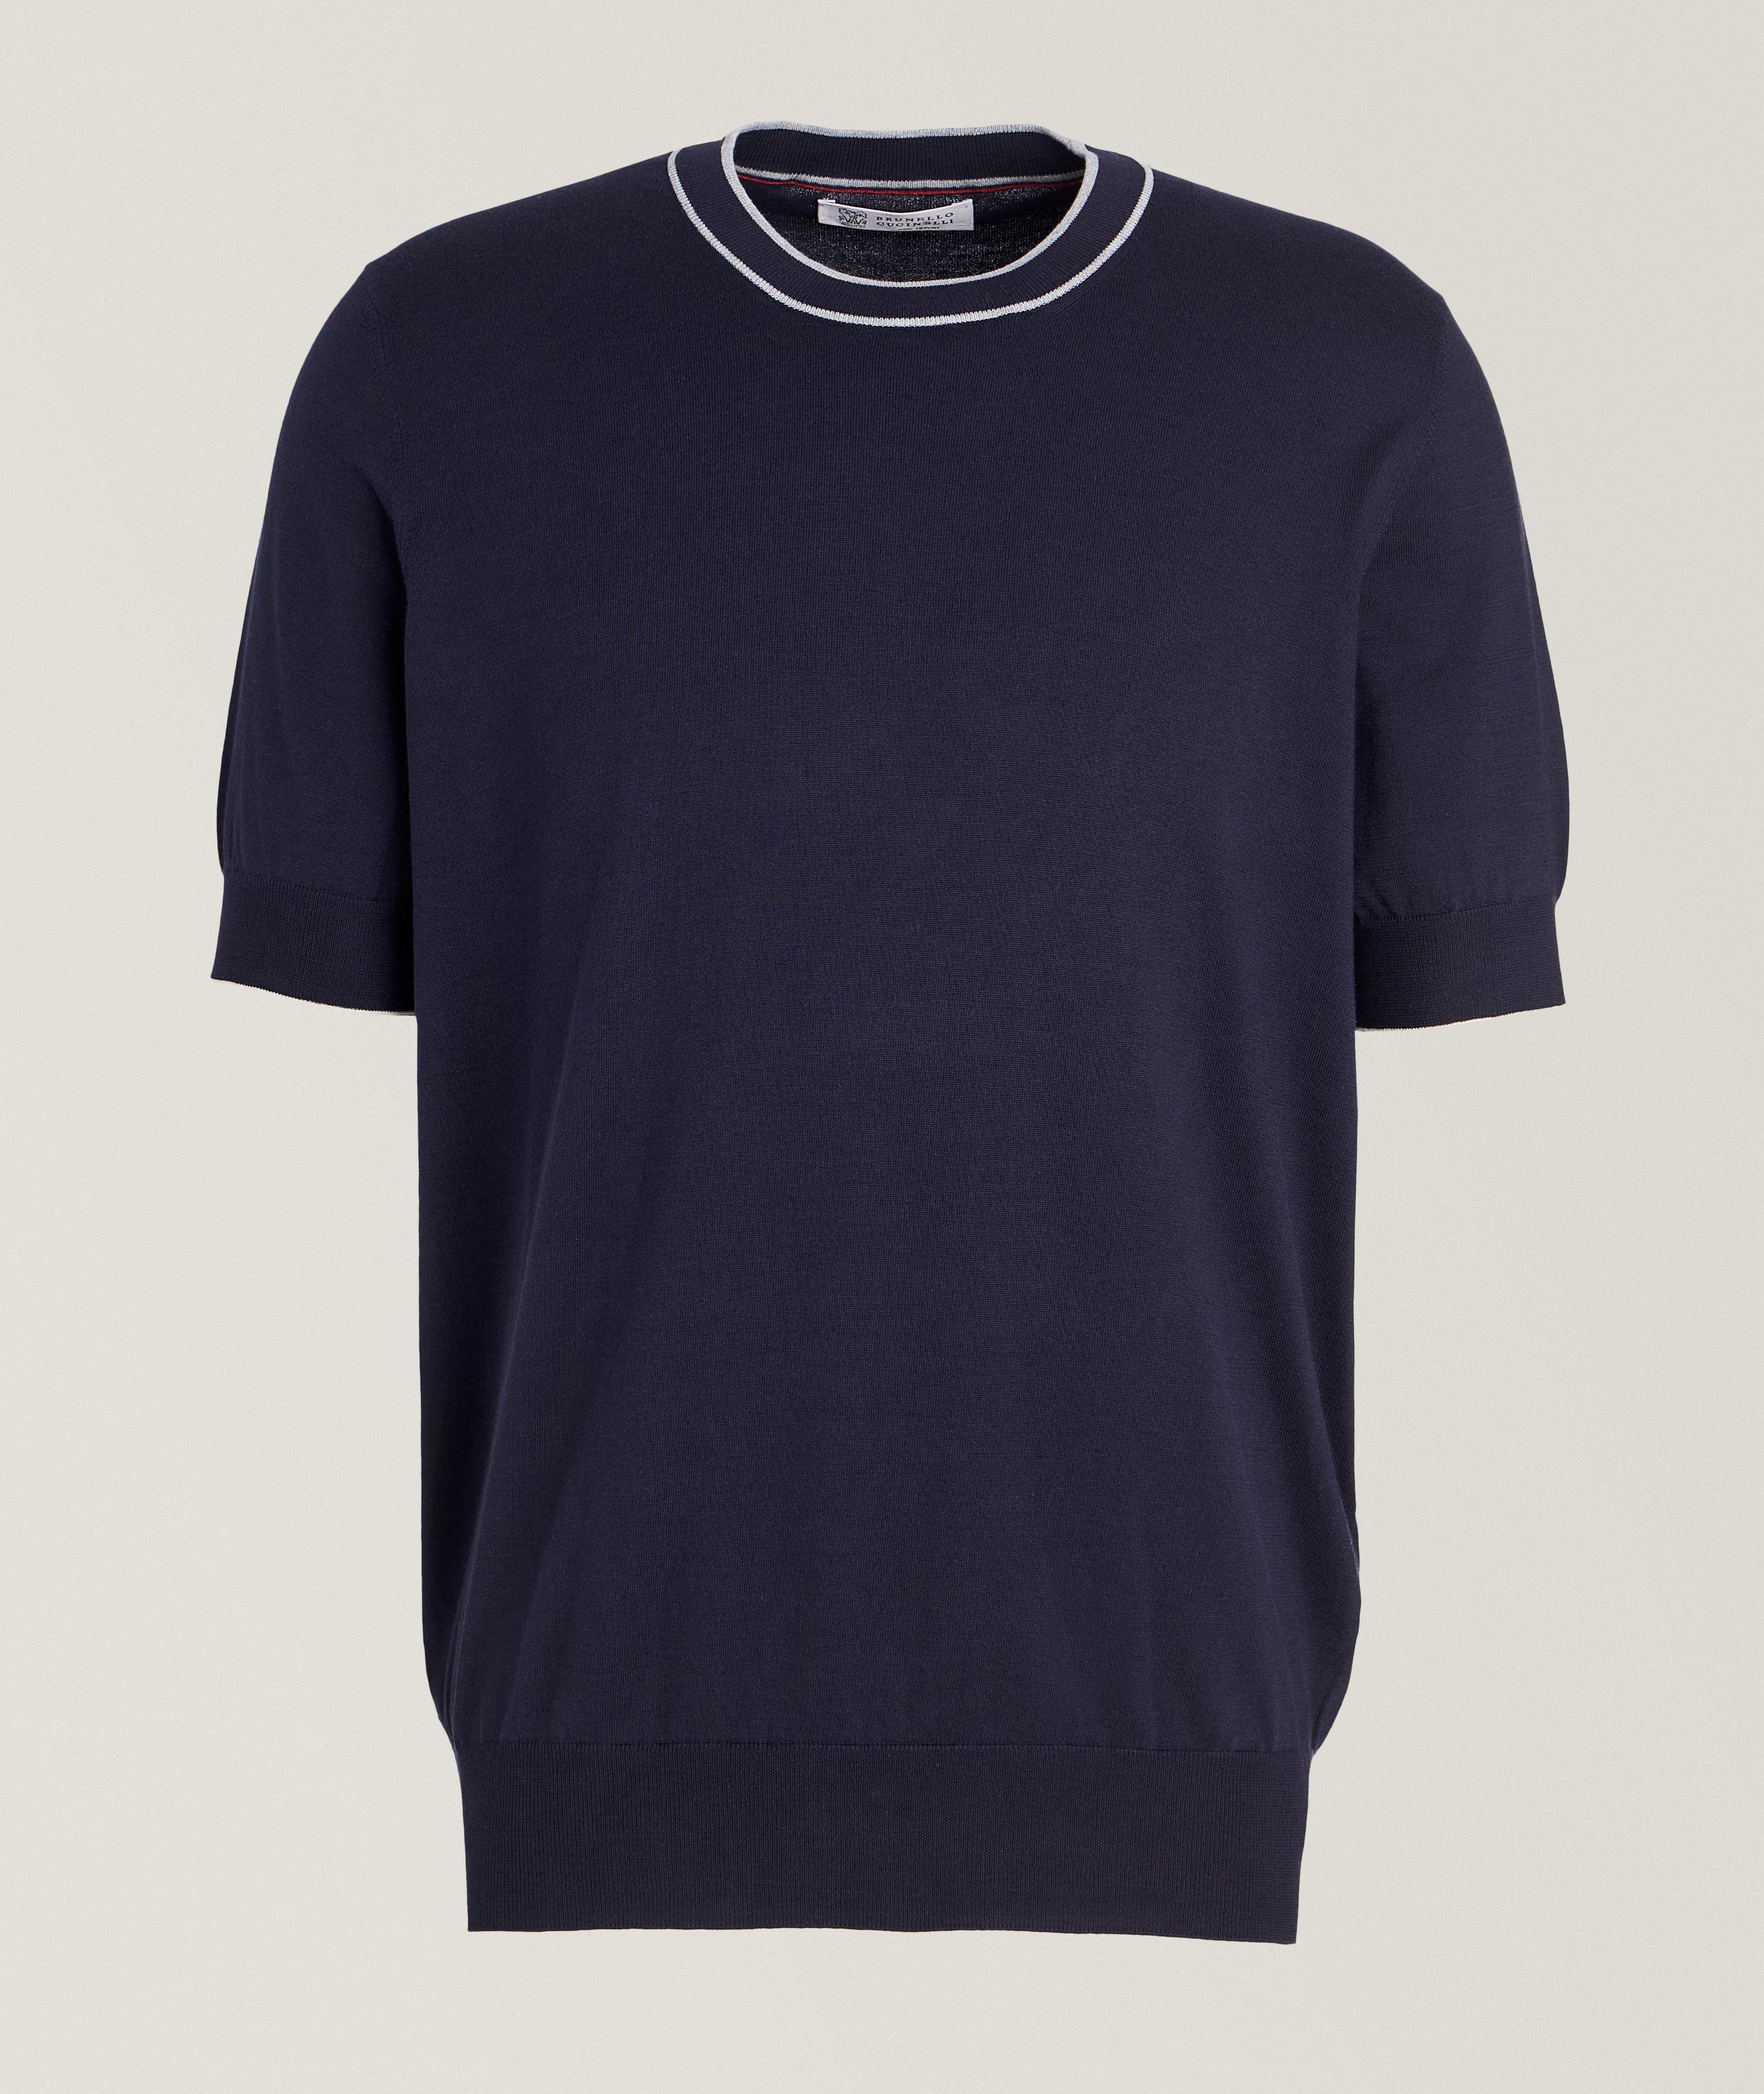 Contrast Tipped Cotton T-Shirt